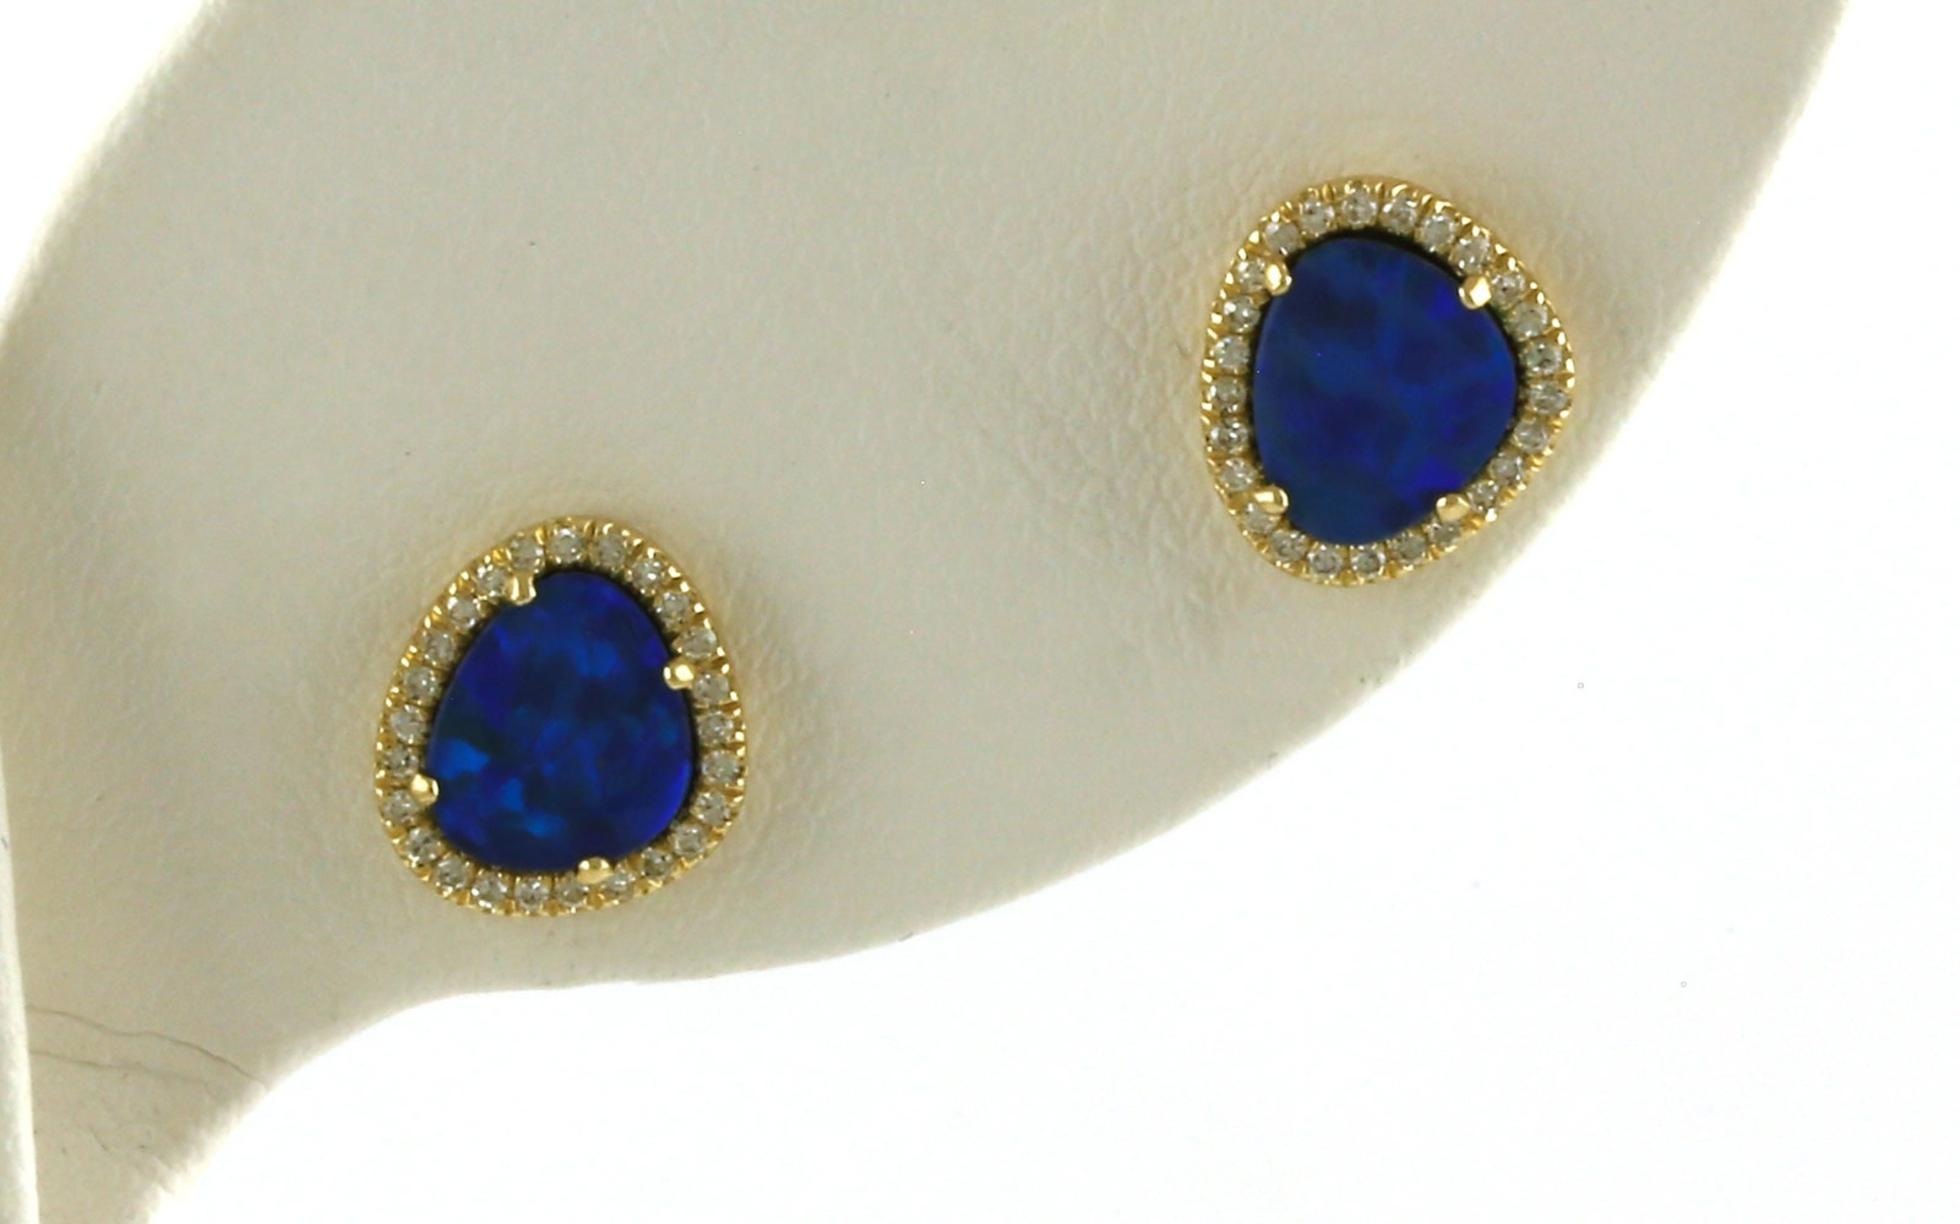 Halo-style Opal Doublet and Diamond Stud Earrings in Yellow Gold (0.91cts TWT)